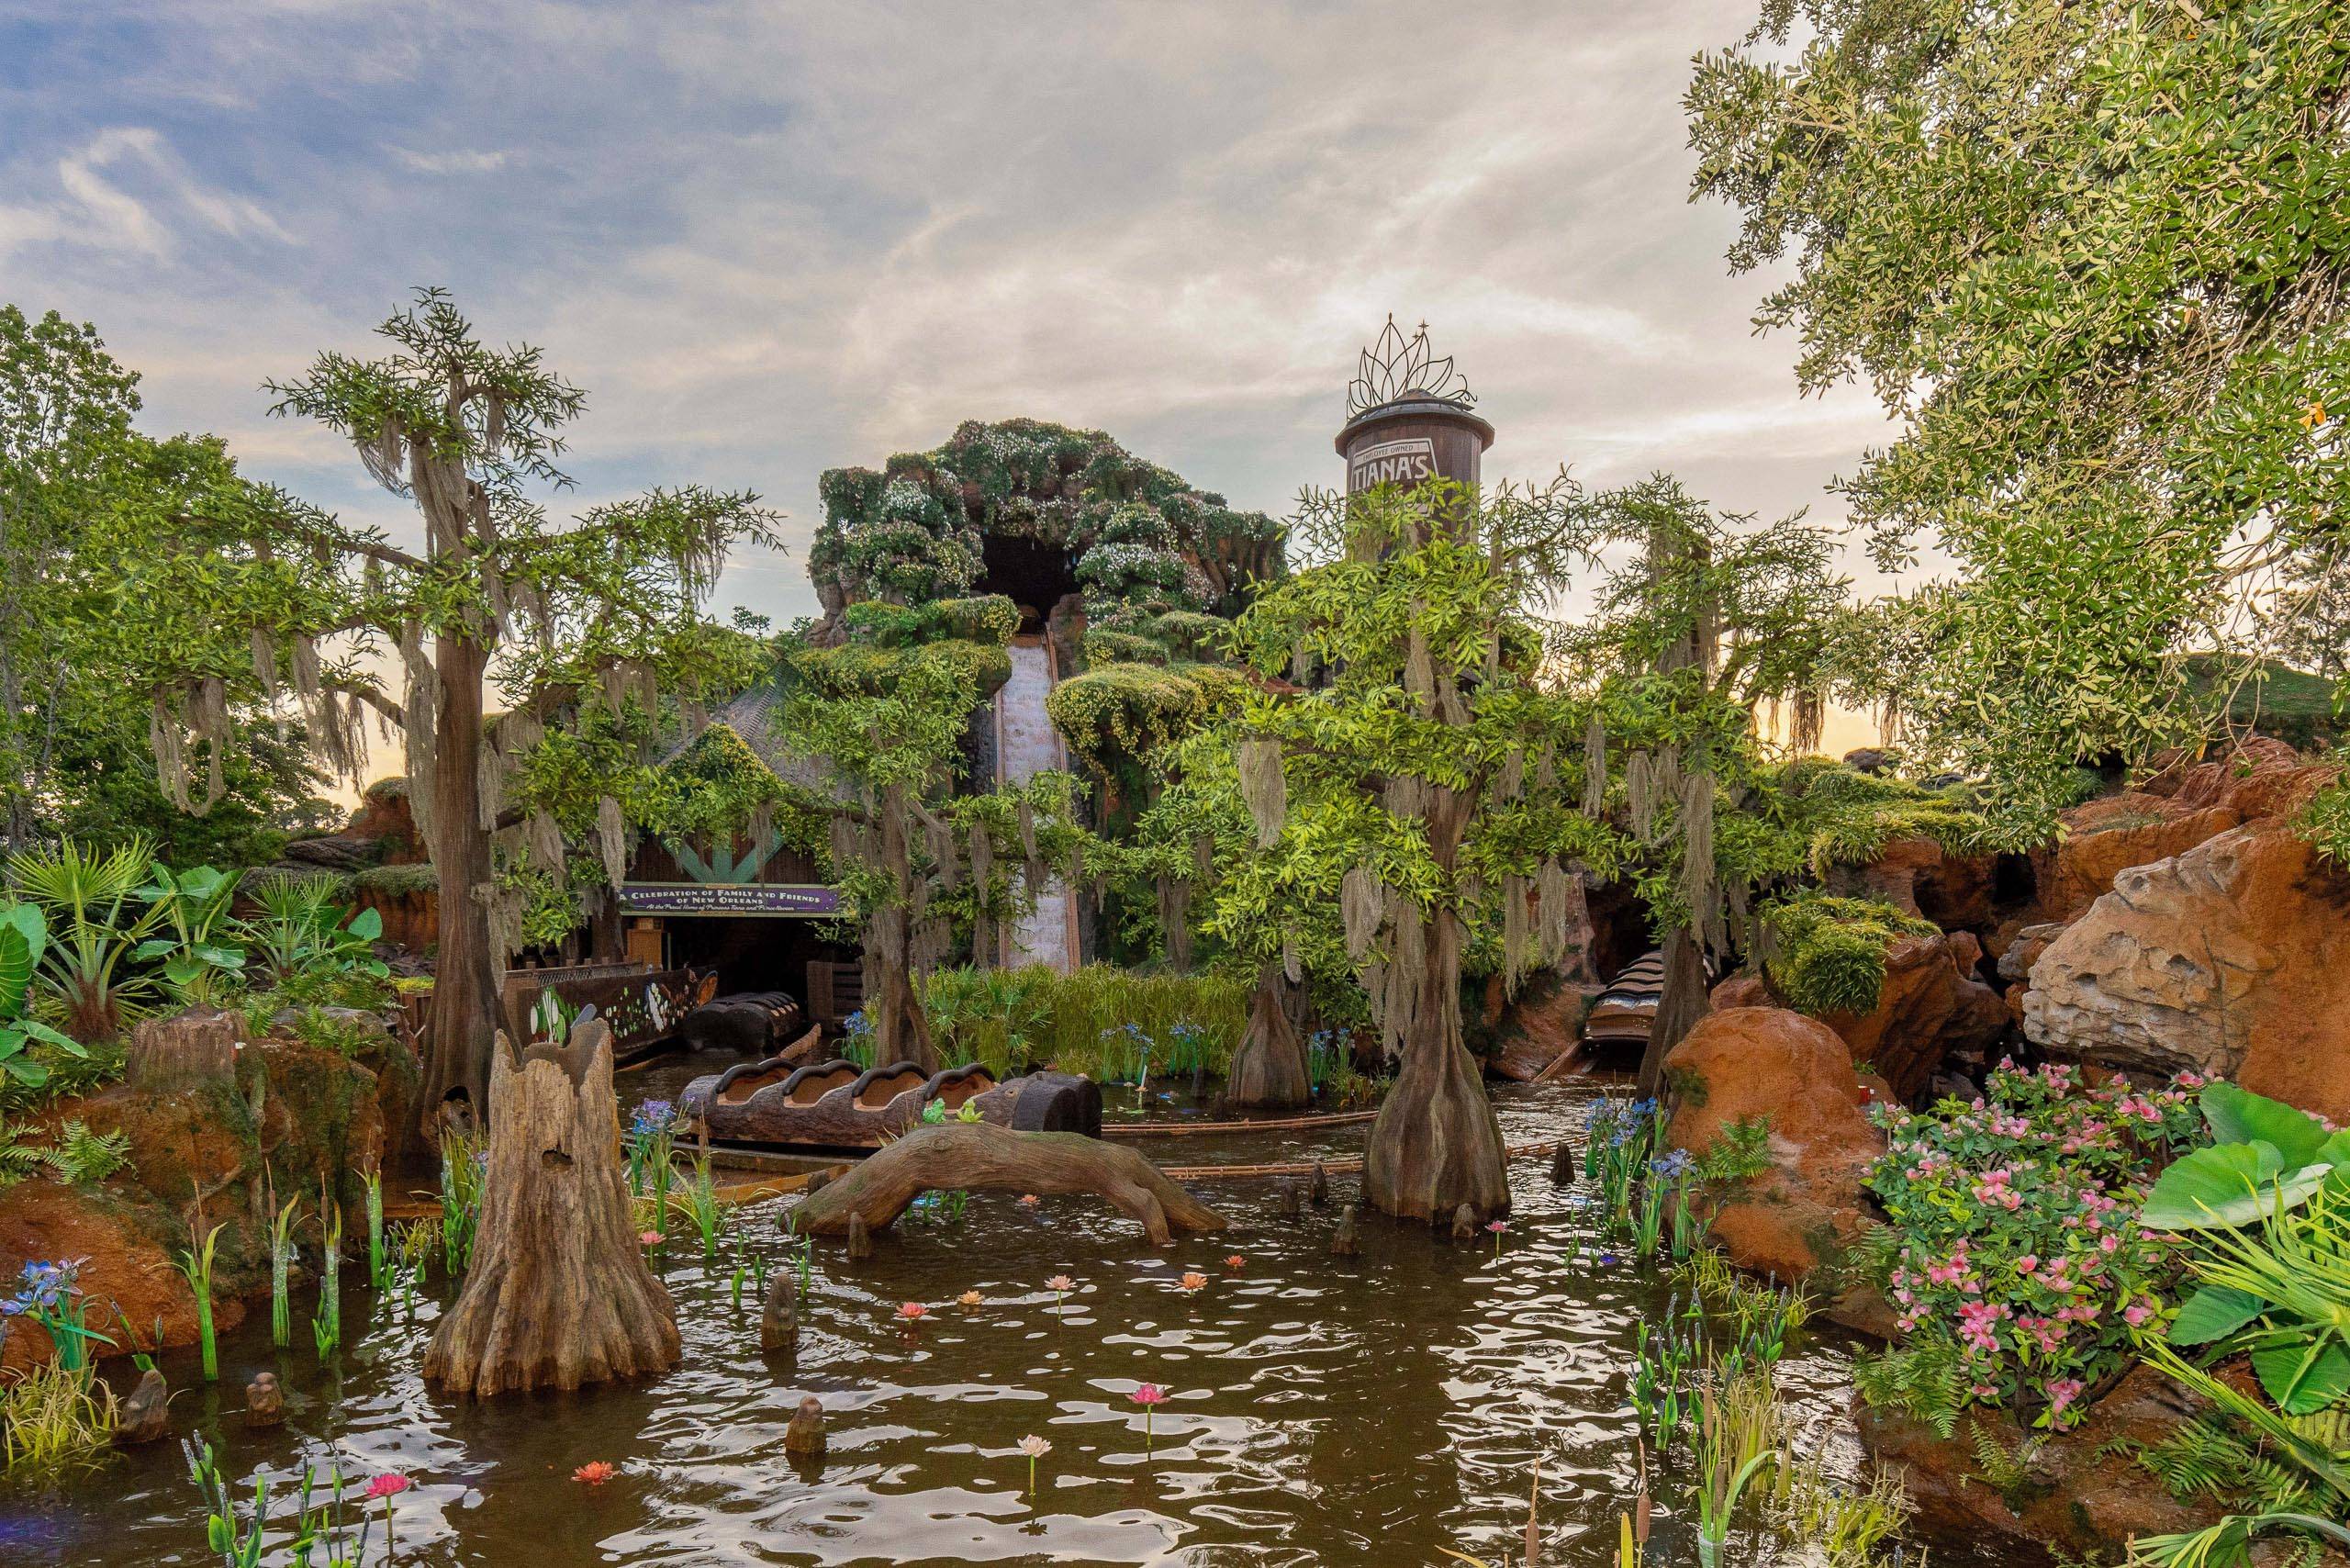 Previews of Tiana's Bayou Adventure will take place June 2 through June 26